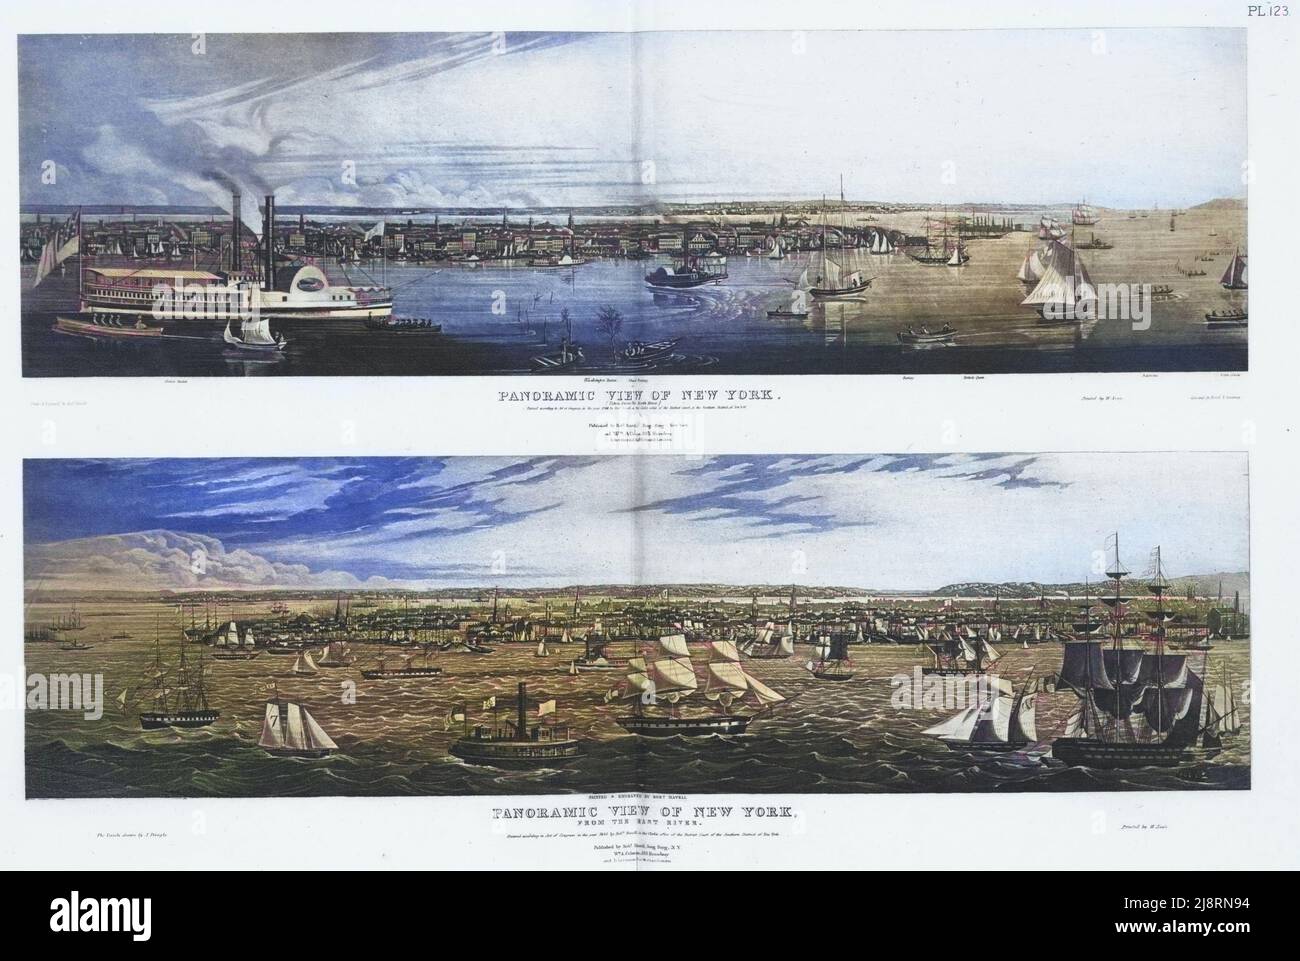 Panoramic View of New York (Taken From the North River) [The Havell North River View] c. 1839 (Top) Panoramic View of New York (Taken From the South River) [The Havell South River View] c. 1843 (Bottom) The iconography of Manhattan Island, 1498-1909 compiled from original sources and illustrated by photo-intaglio reproductions of important maps, plans, views, and documents in public and private collections - Volume 3 by Isaac Newton Phelps Stokes, Publisher New York : Robert H. Dodd 1918 Stock Photo